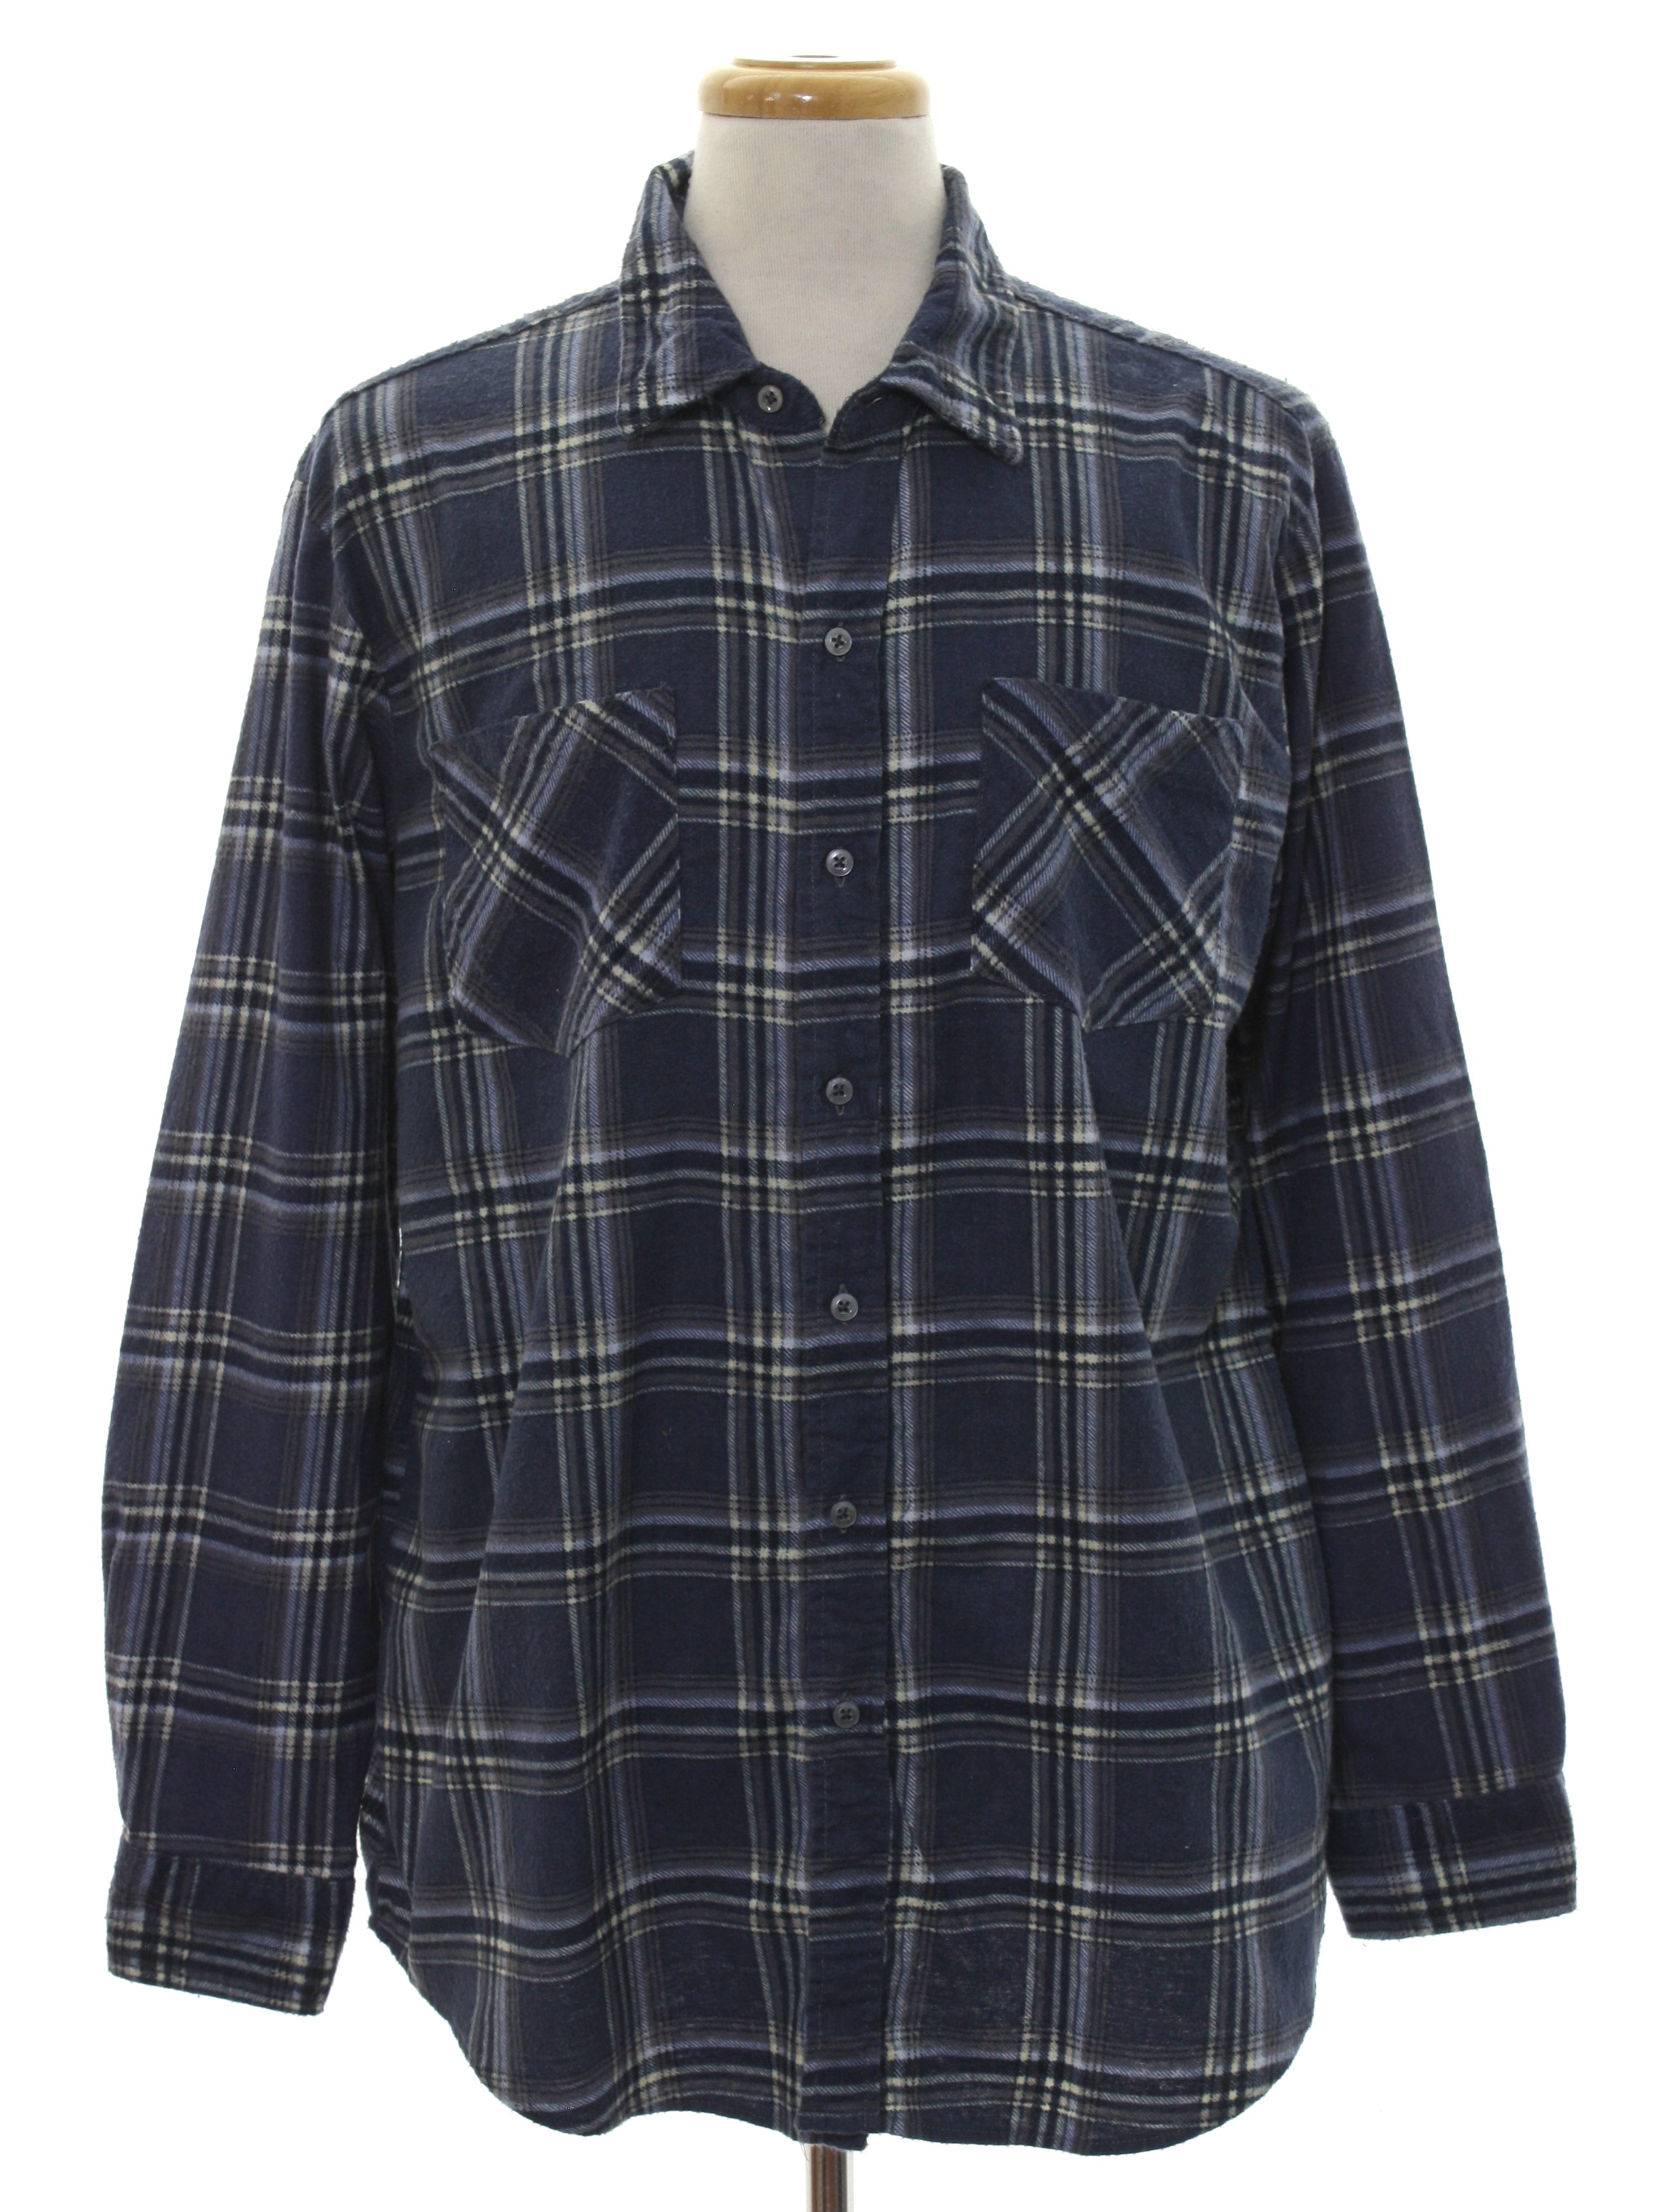 Nineties Vintage Shirt: 90s -Haband- Mens plaid pattern in shades of ...